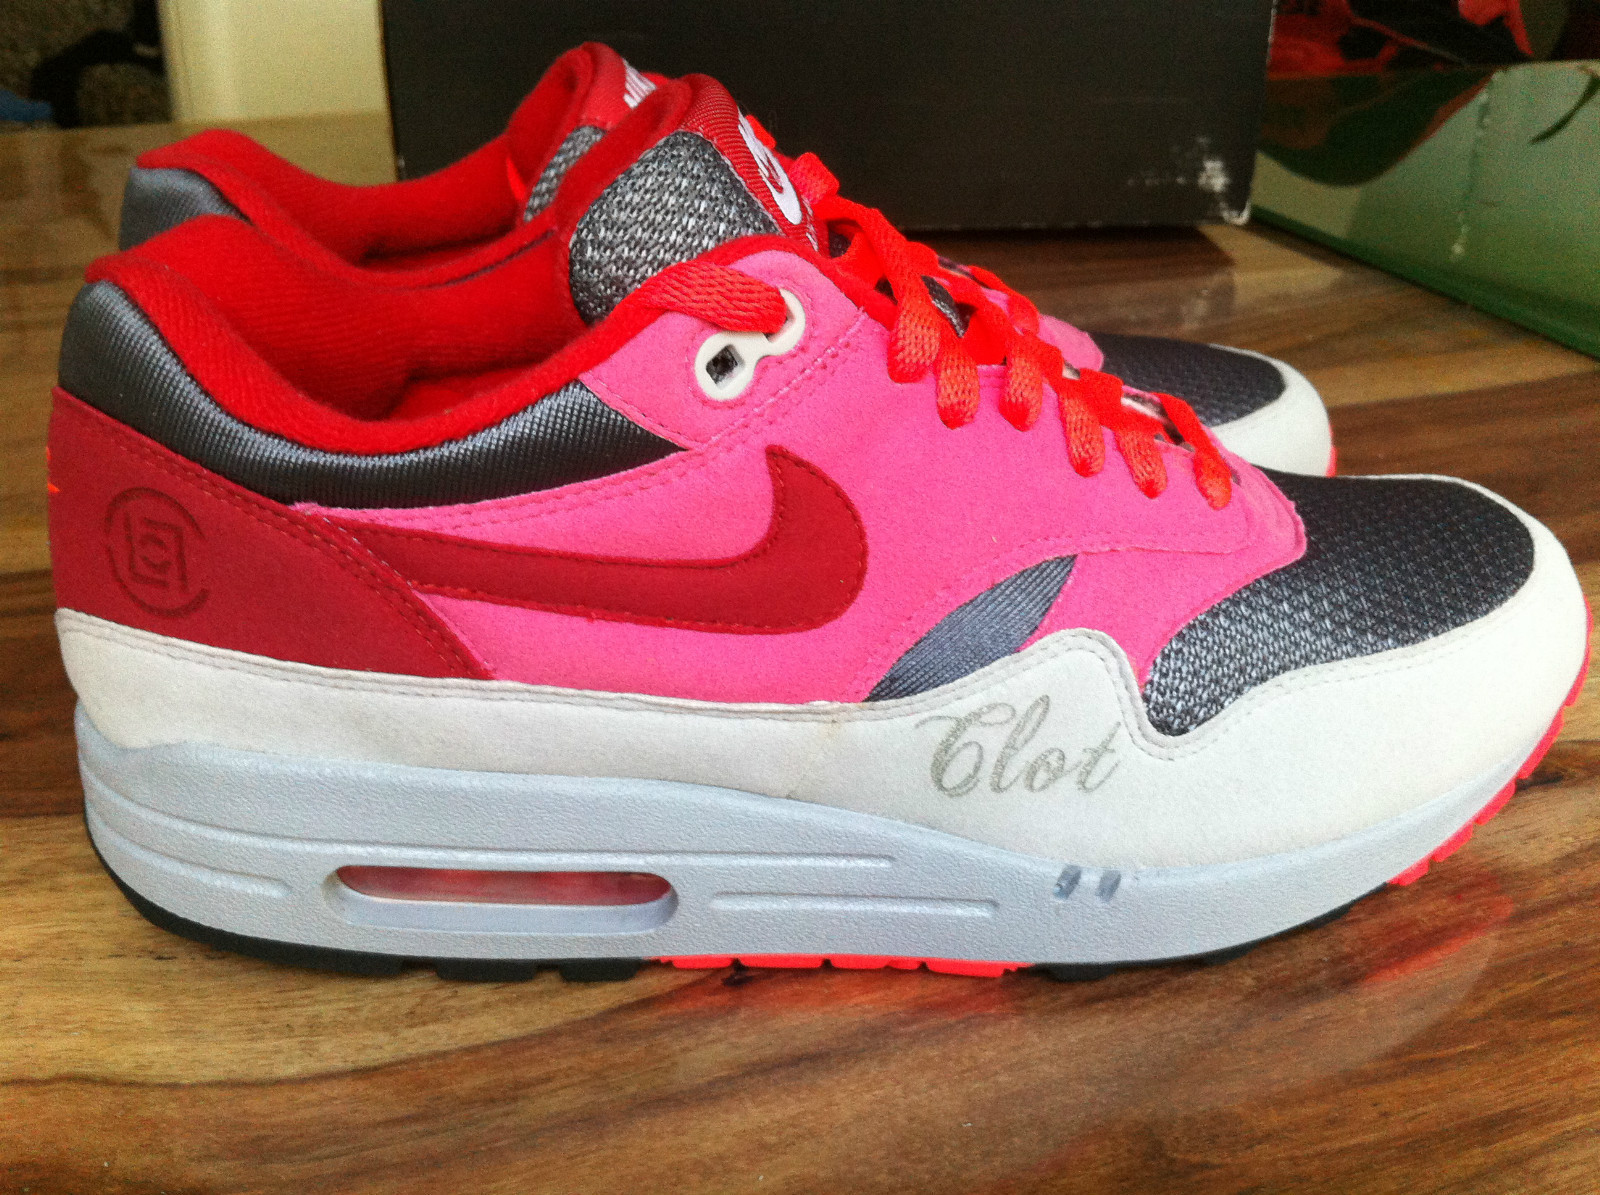 Remembering Kanye West's NIKEiD Air Max 